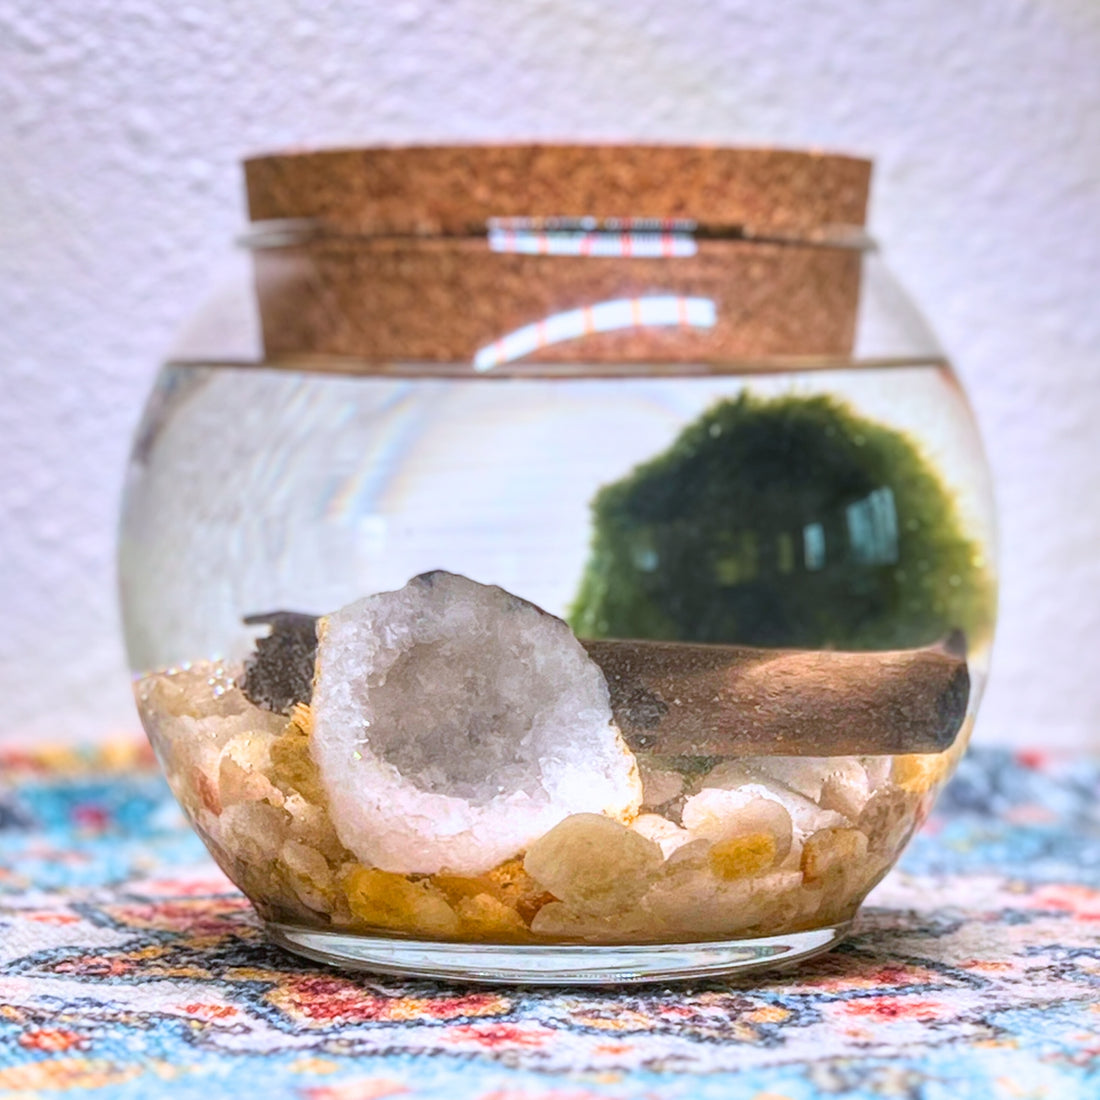 A round glass aquarium with a cork lid on a multicolored textile surface. It contains a large geode, small polished river stones,